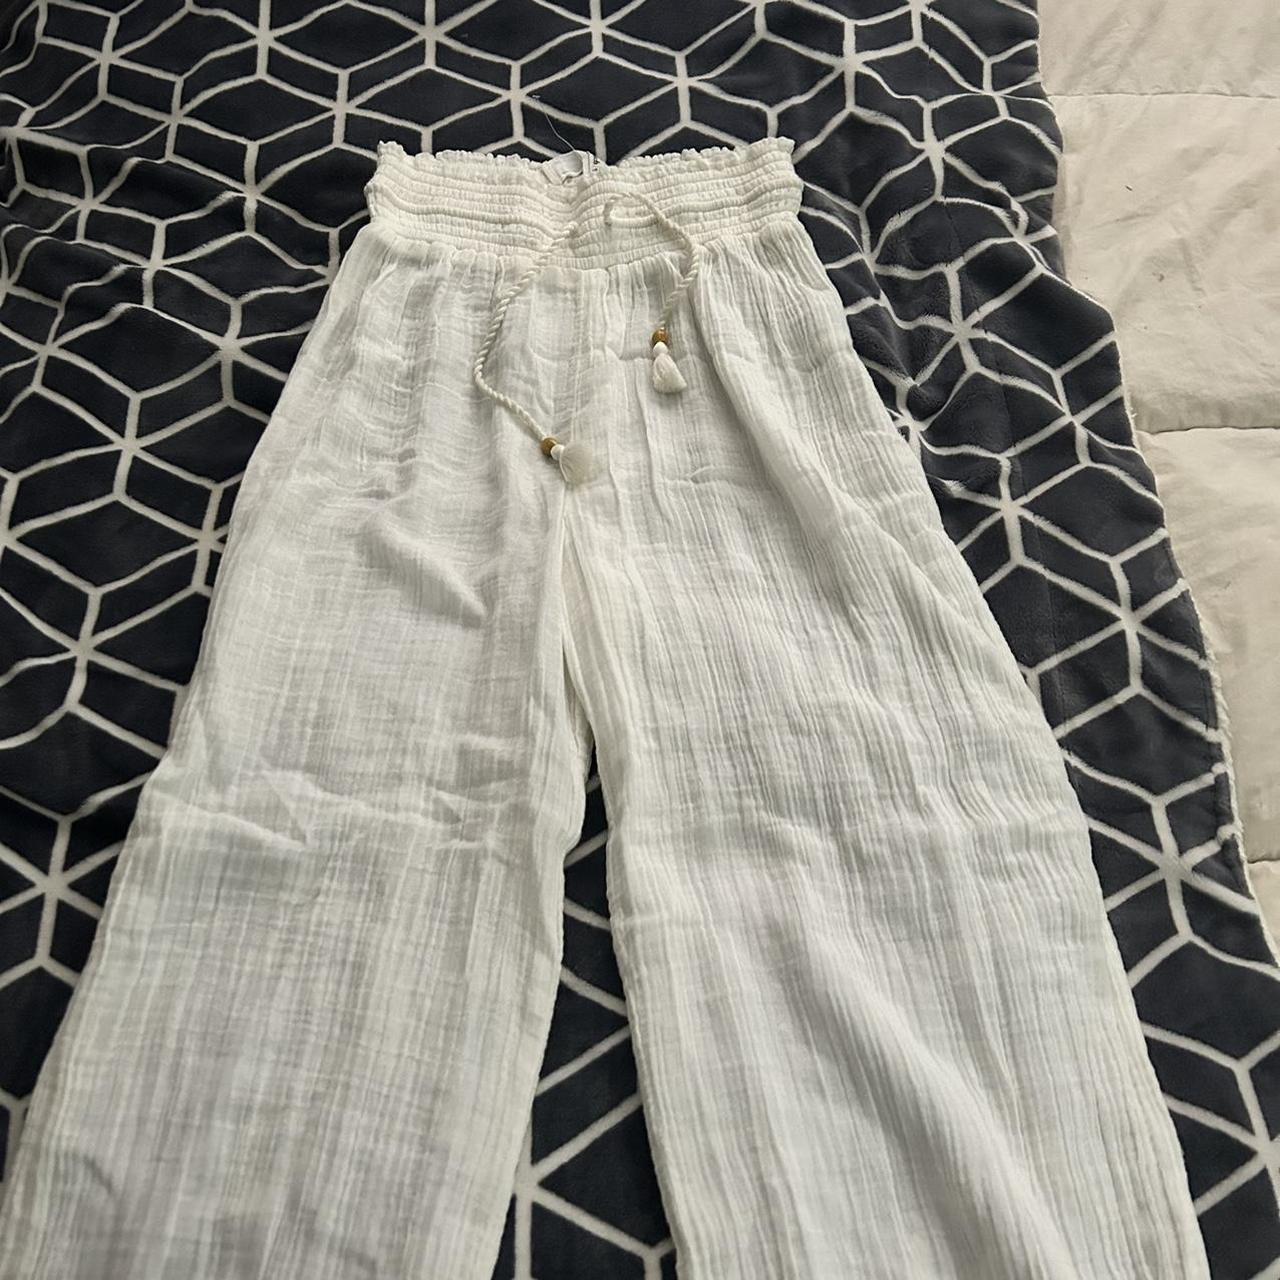 Abercrombie & Fitch Women's White Trousers | Depop